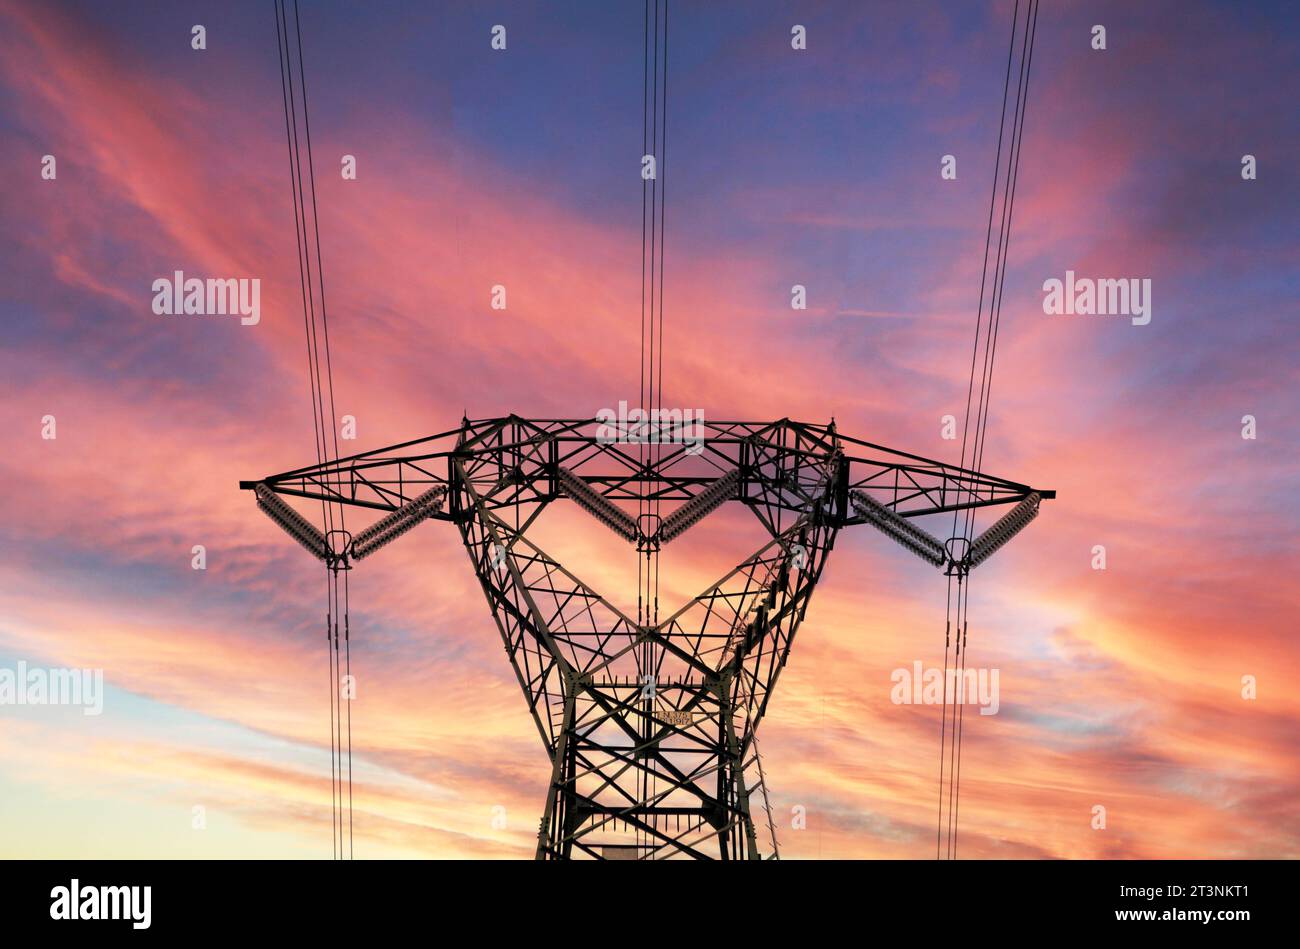 sunset over the energy transition power line Stock Photo